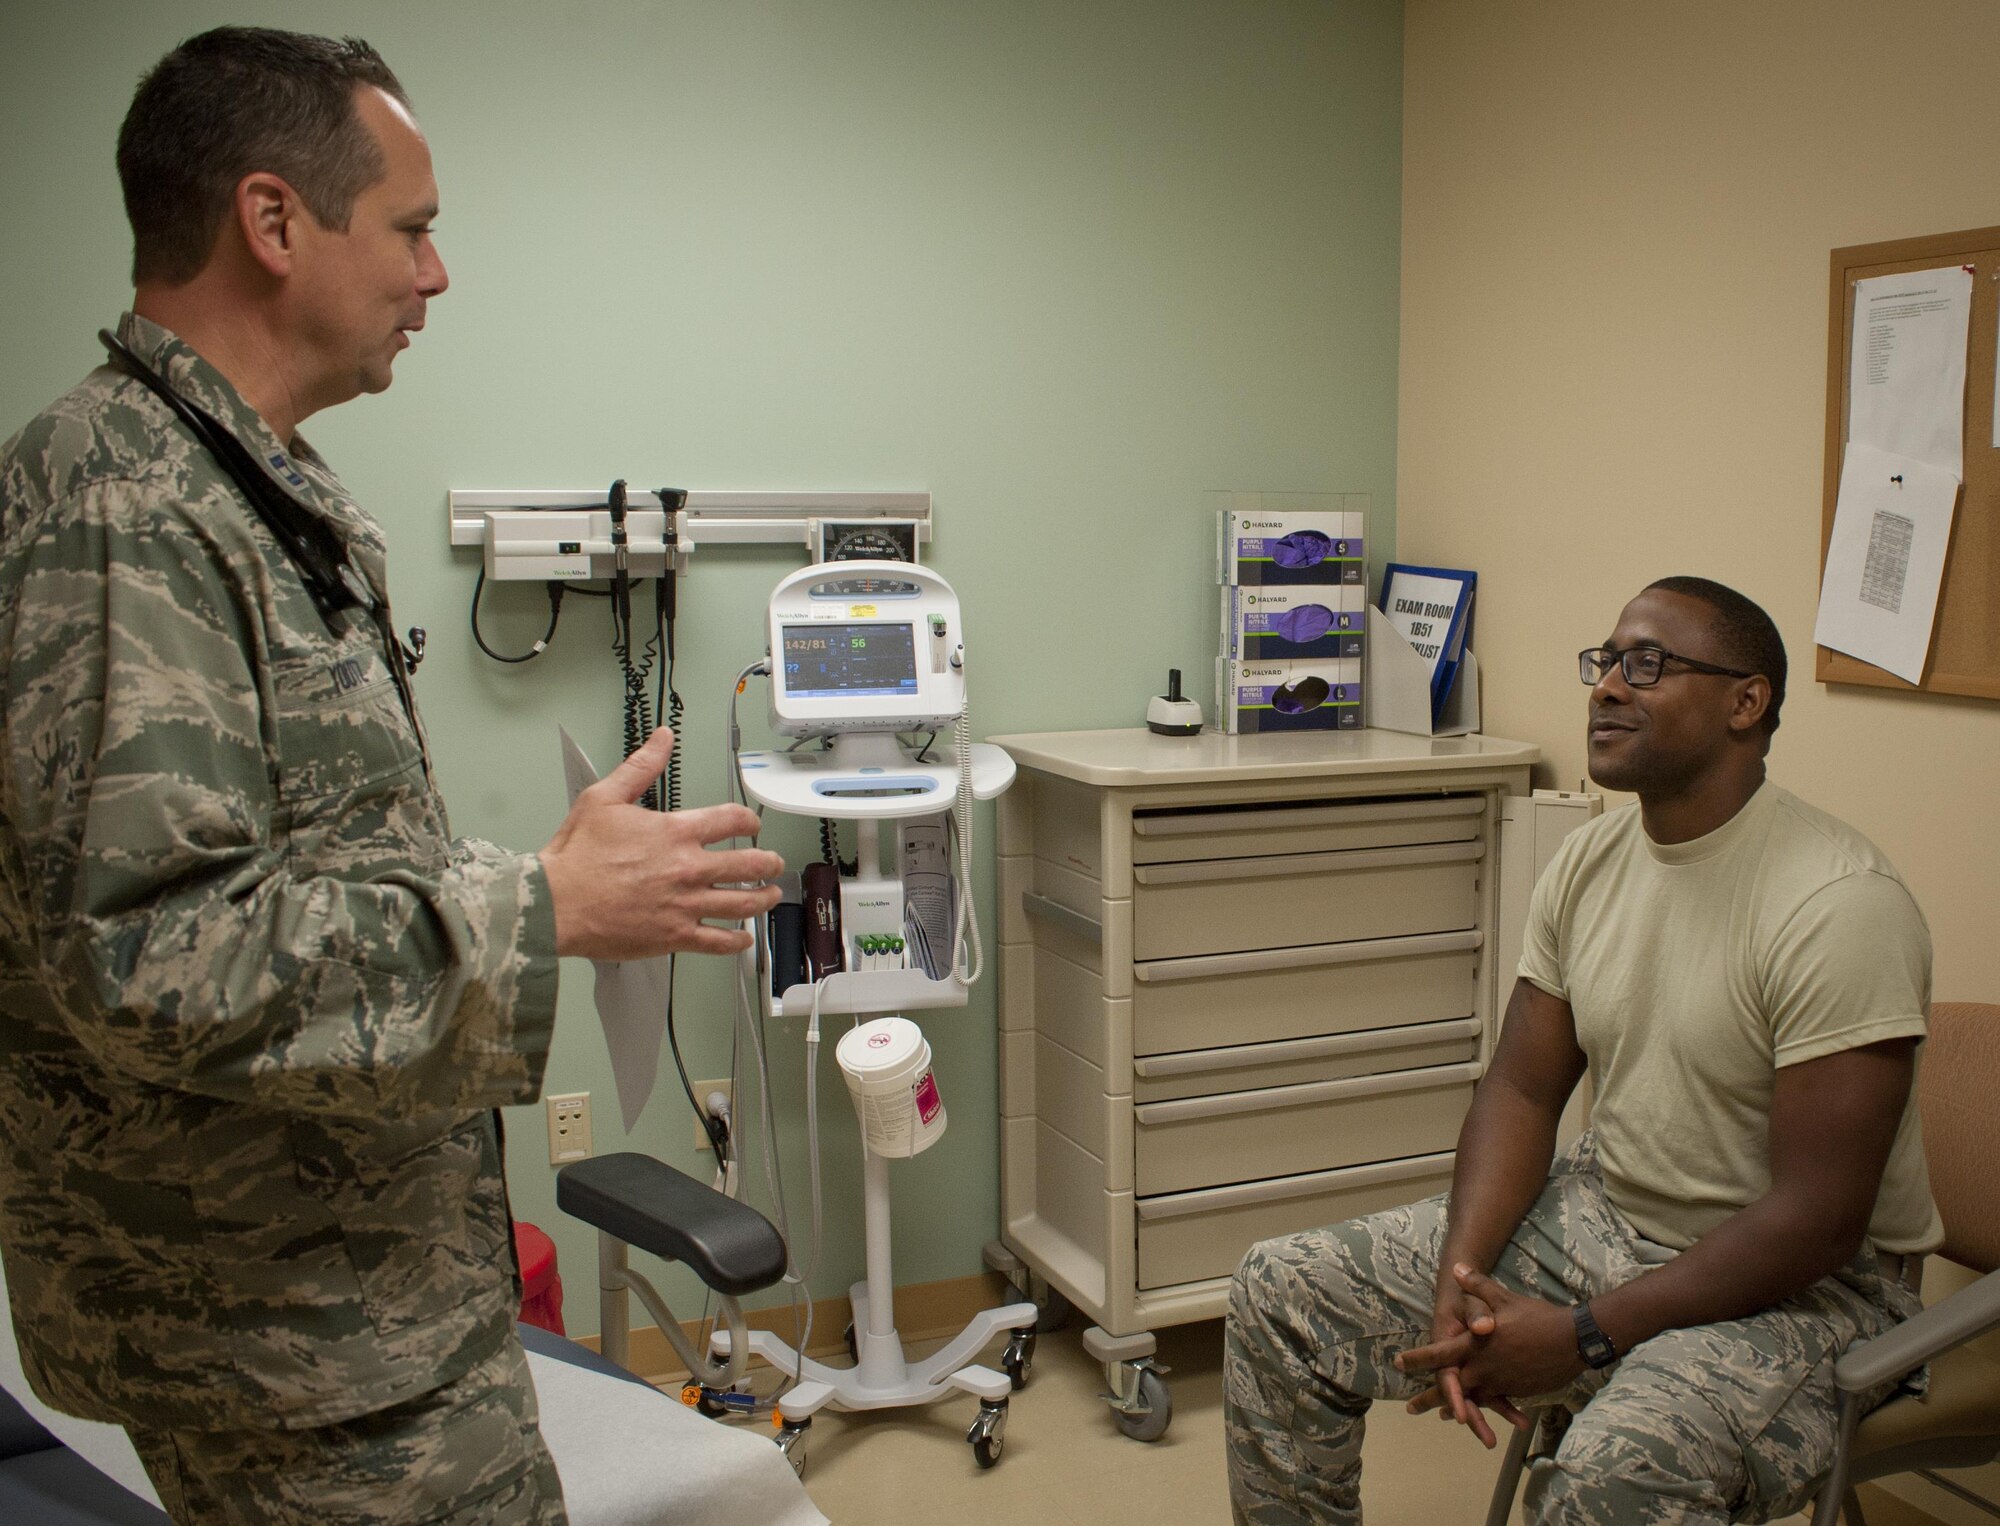 U.S. Air Force Capt. Gregory Youtz, a family health physician assistant assigned to the 6th Medical Support Operations Squadron, talks to a patient in the 6th Medical Group Clinic at MacDill Air Force Base, Fla., Sept. 7, 2017. The family health clinic cares for over 19,000 patients. (U.S. Air Force photo by Senior Airman Mariette Adams)